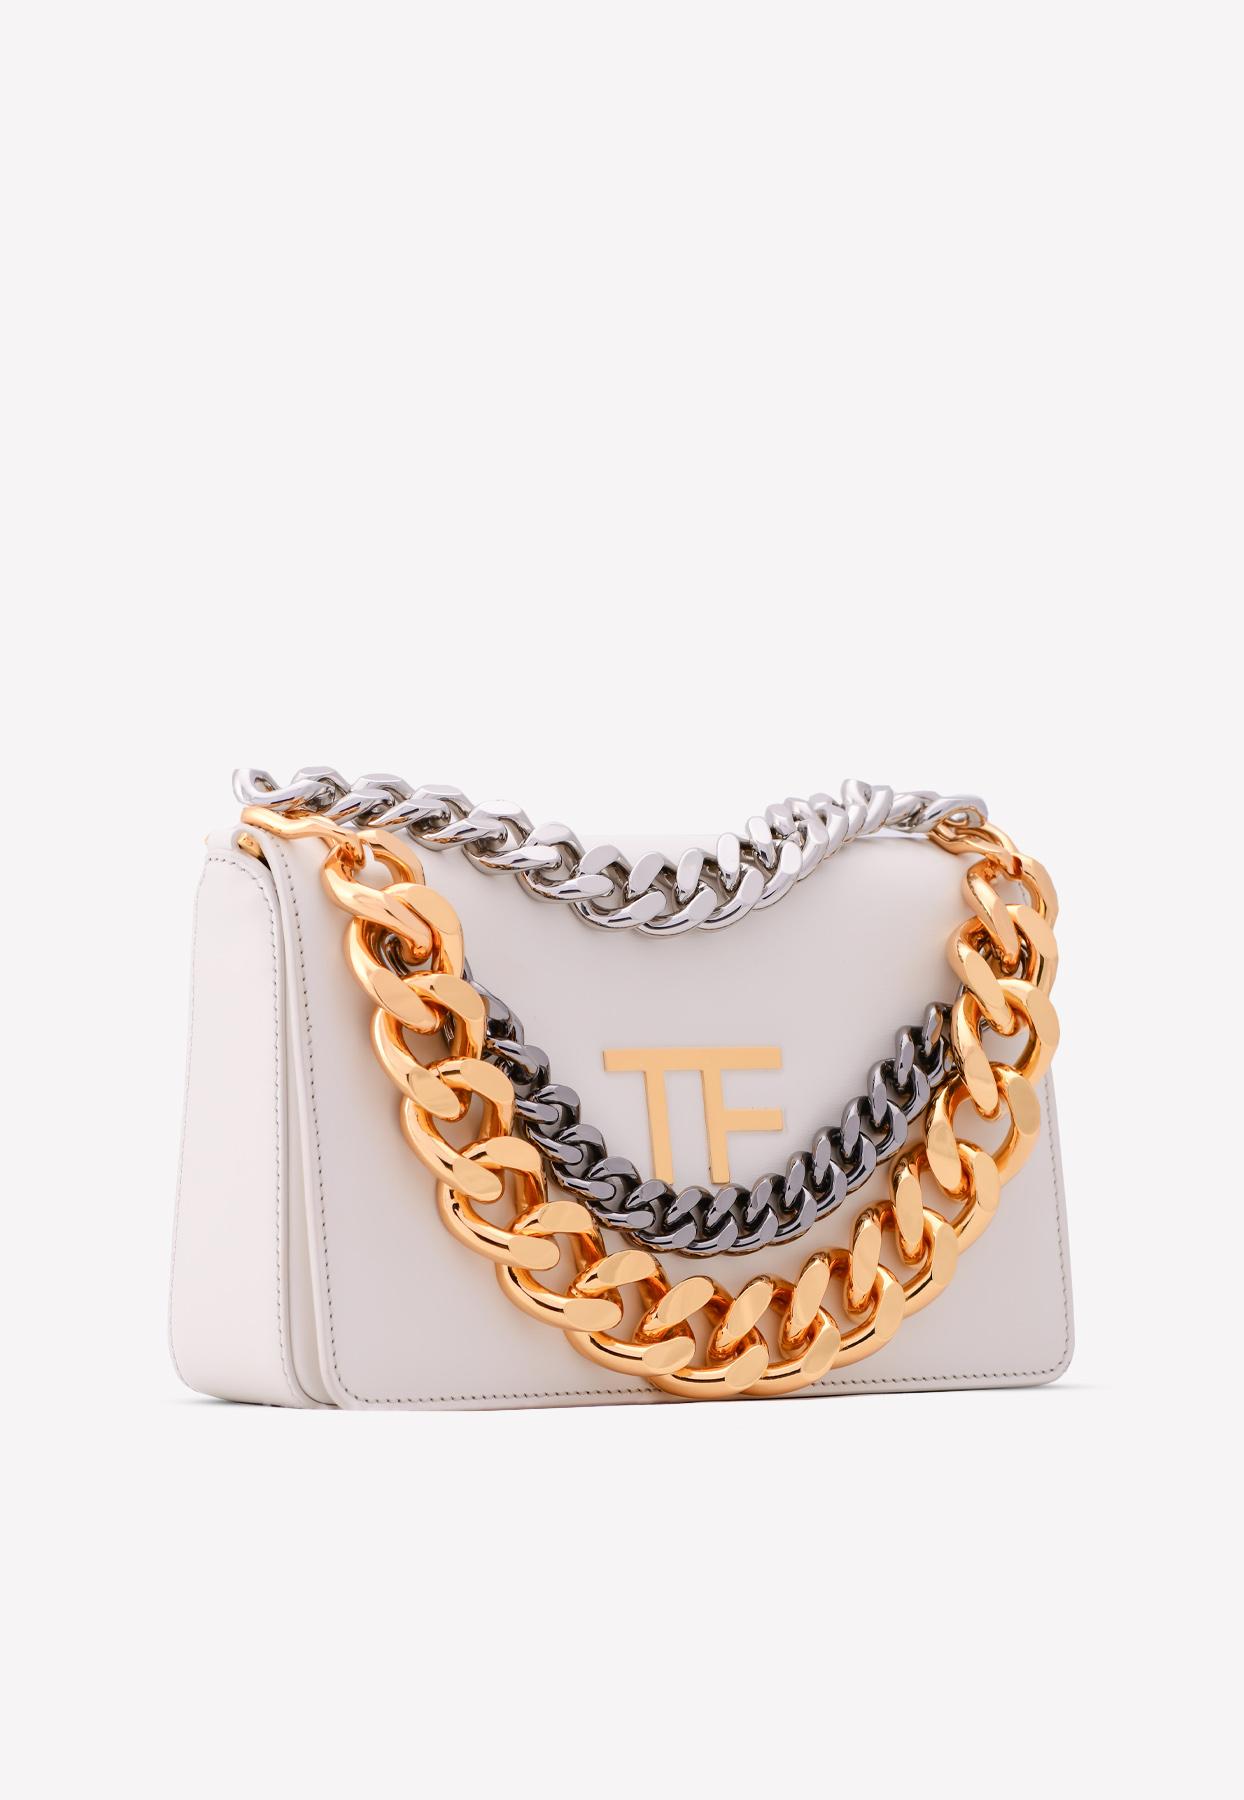 Tom Ford Triple Chain Shoulder Bag In Palmelatto Leather in White | Lyst